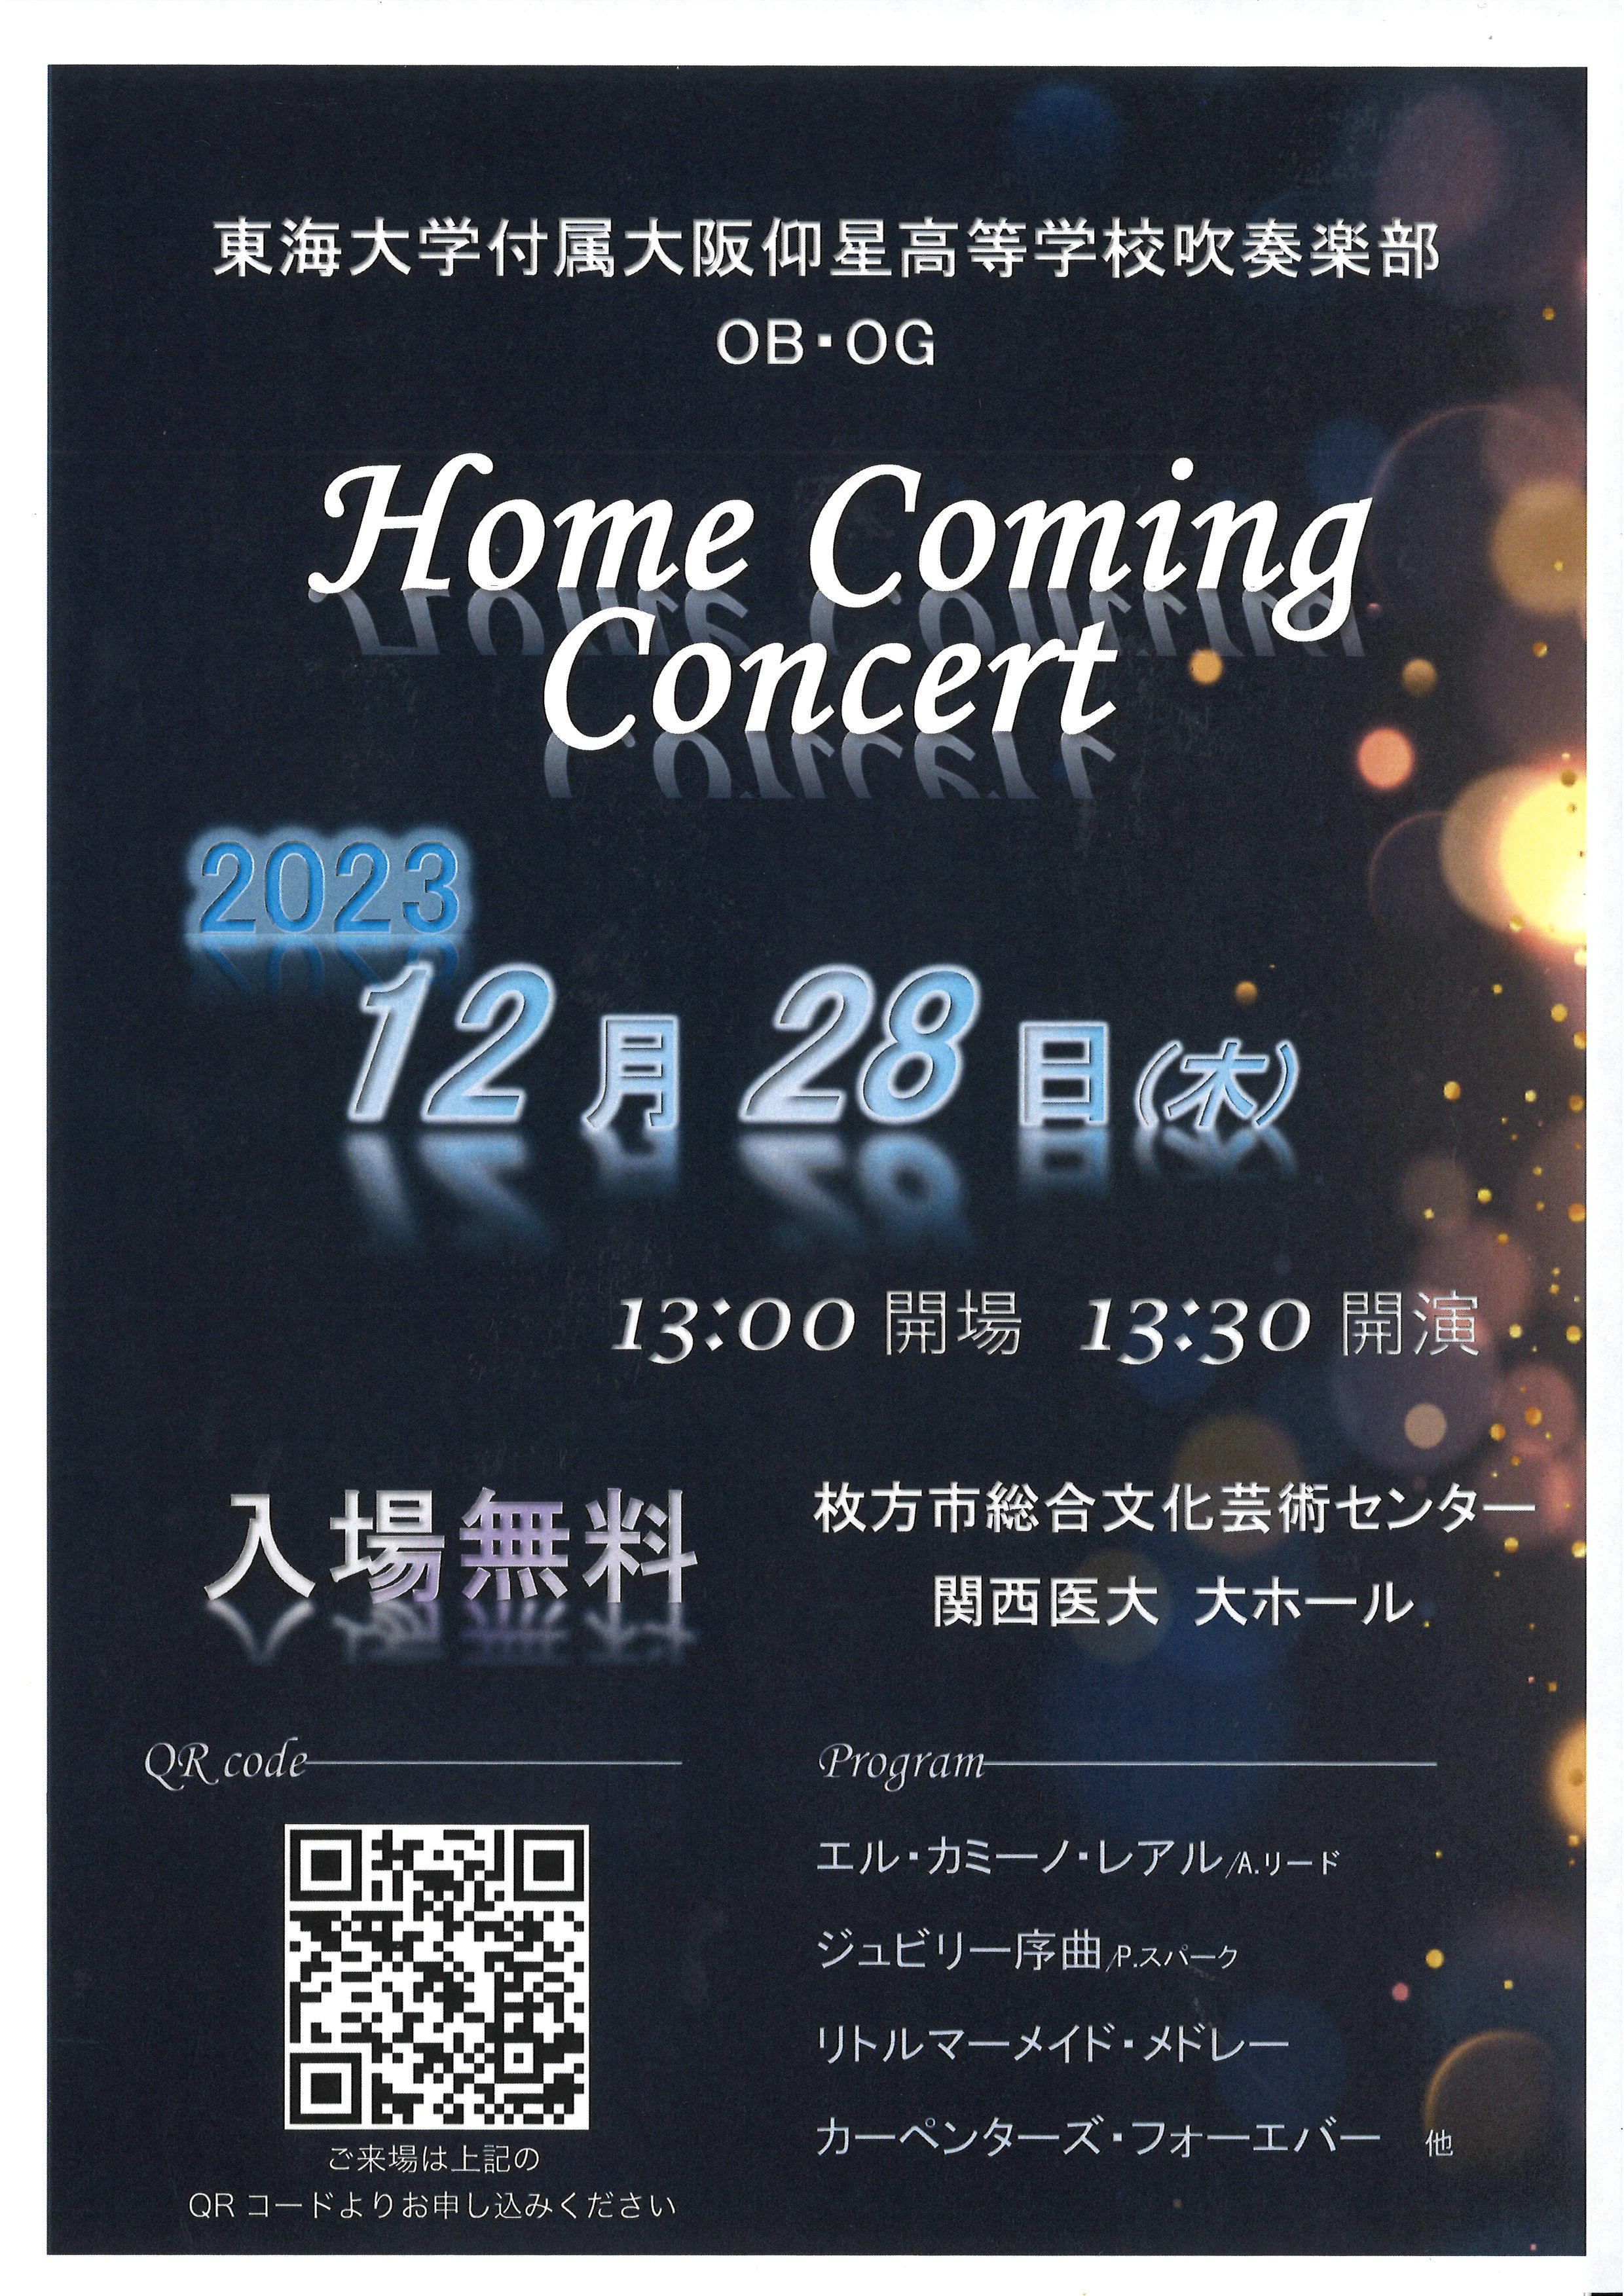 Home Coming Concert